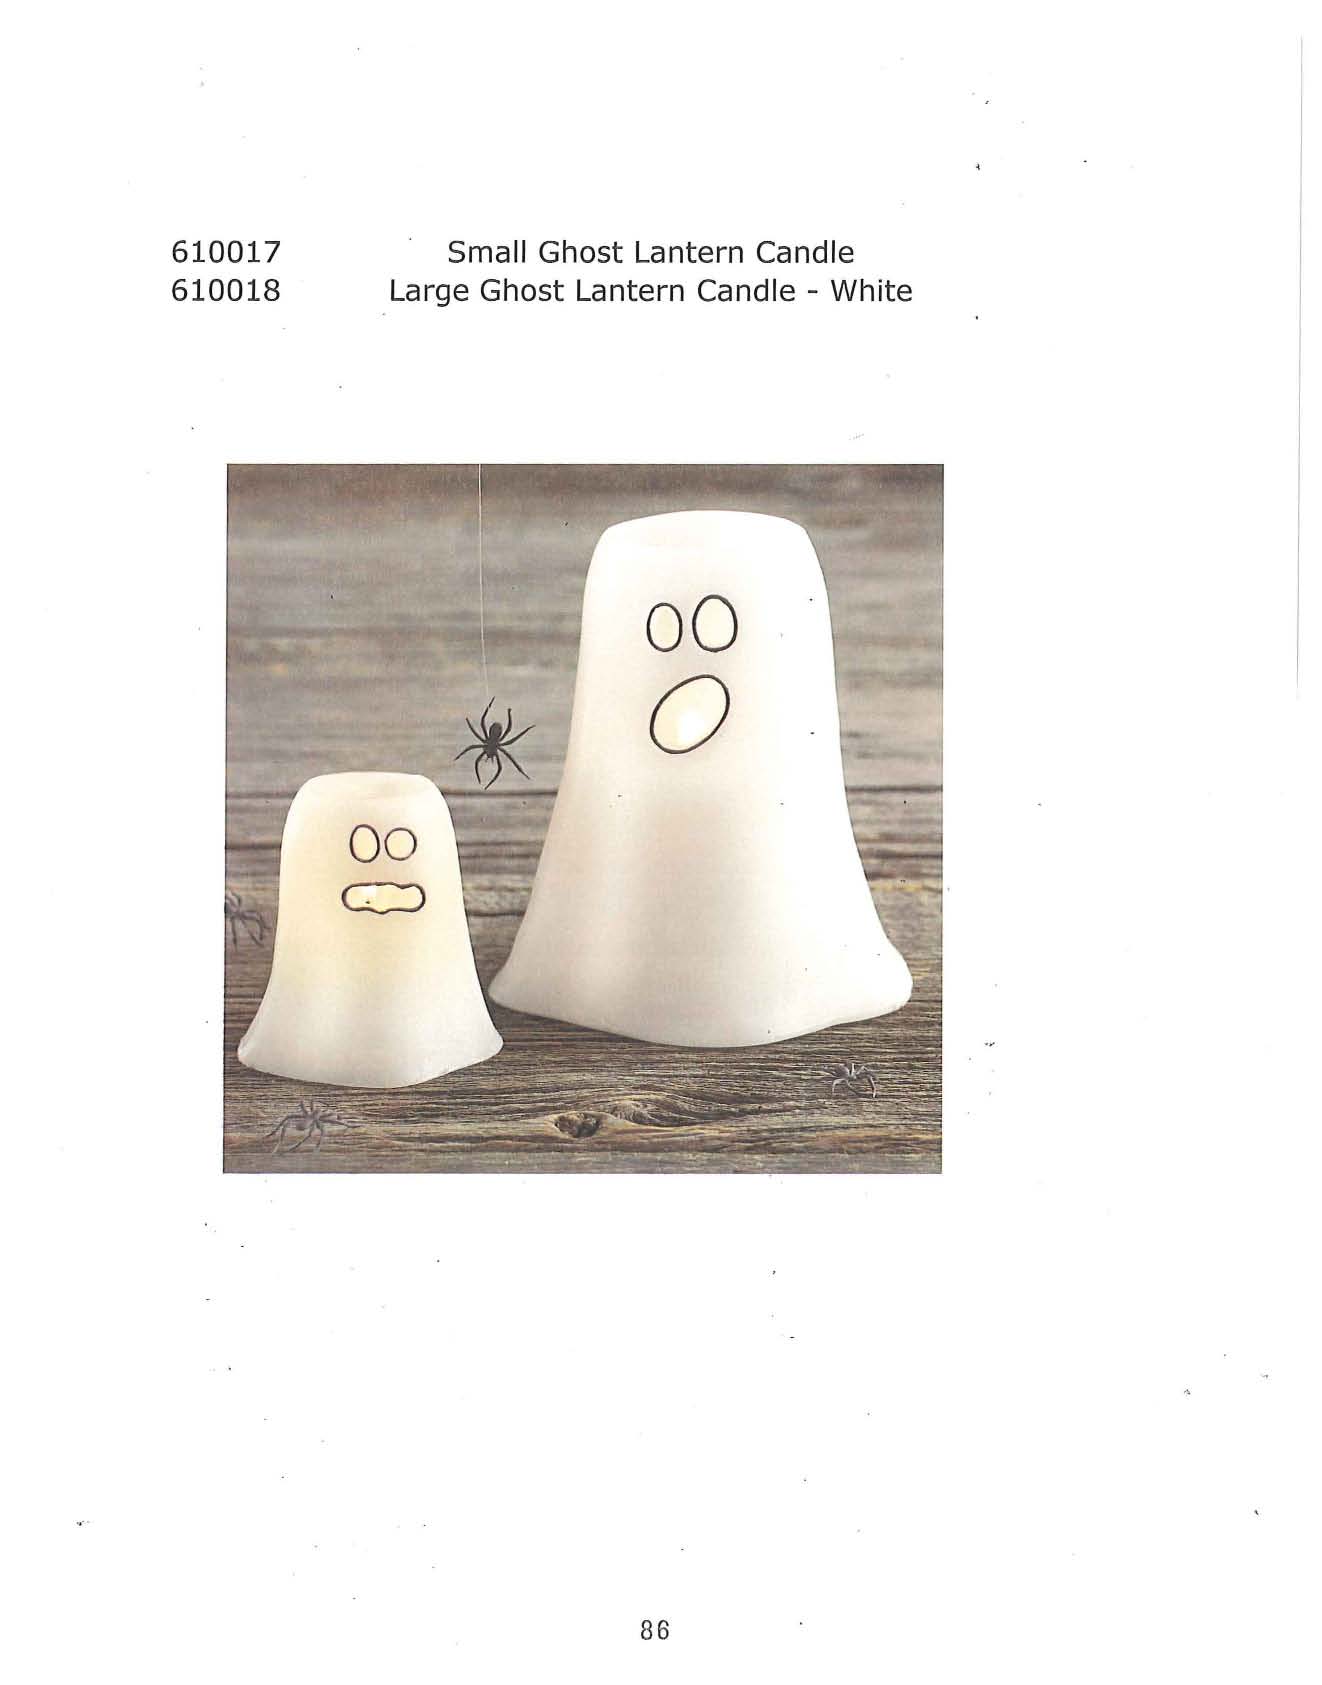 Small and Large Ghost Lantern Candle - White